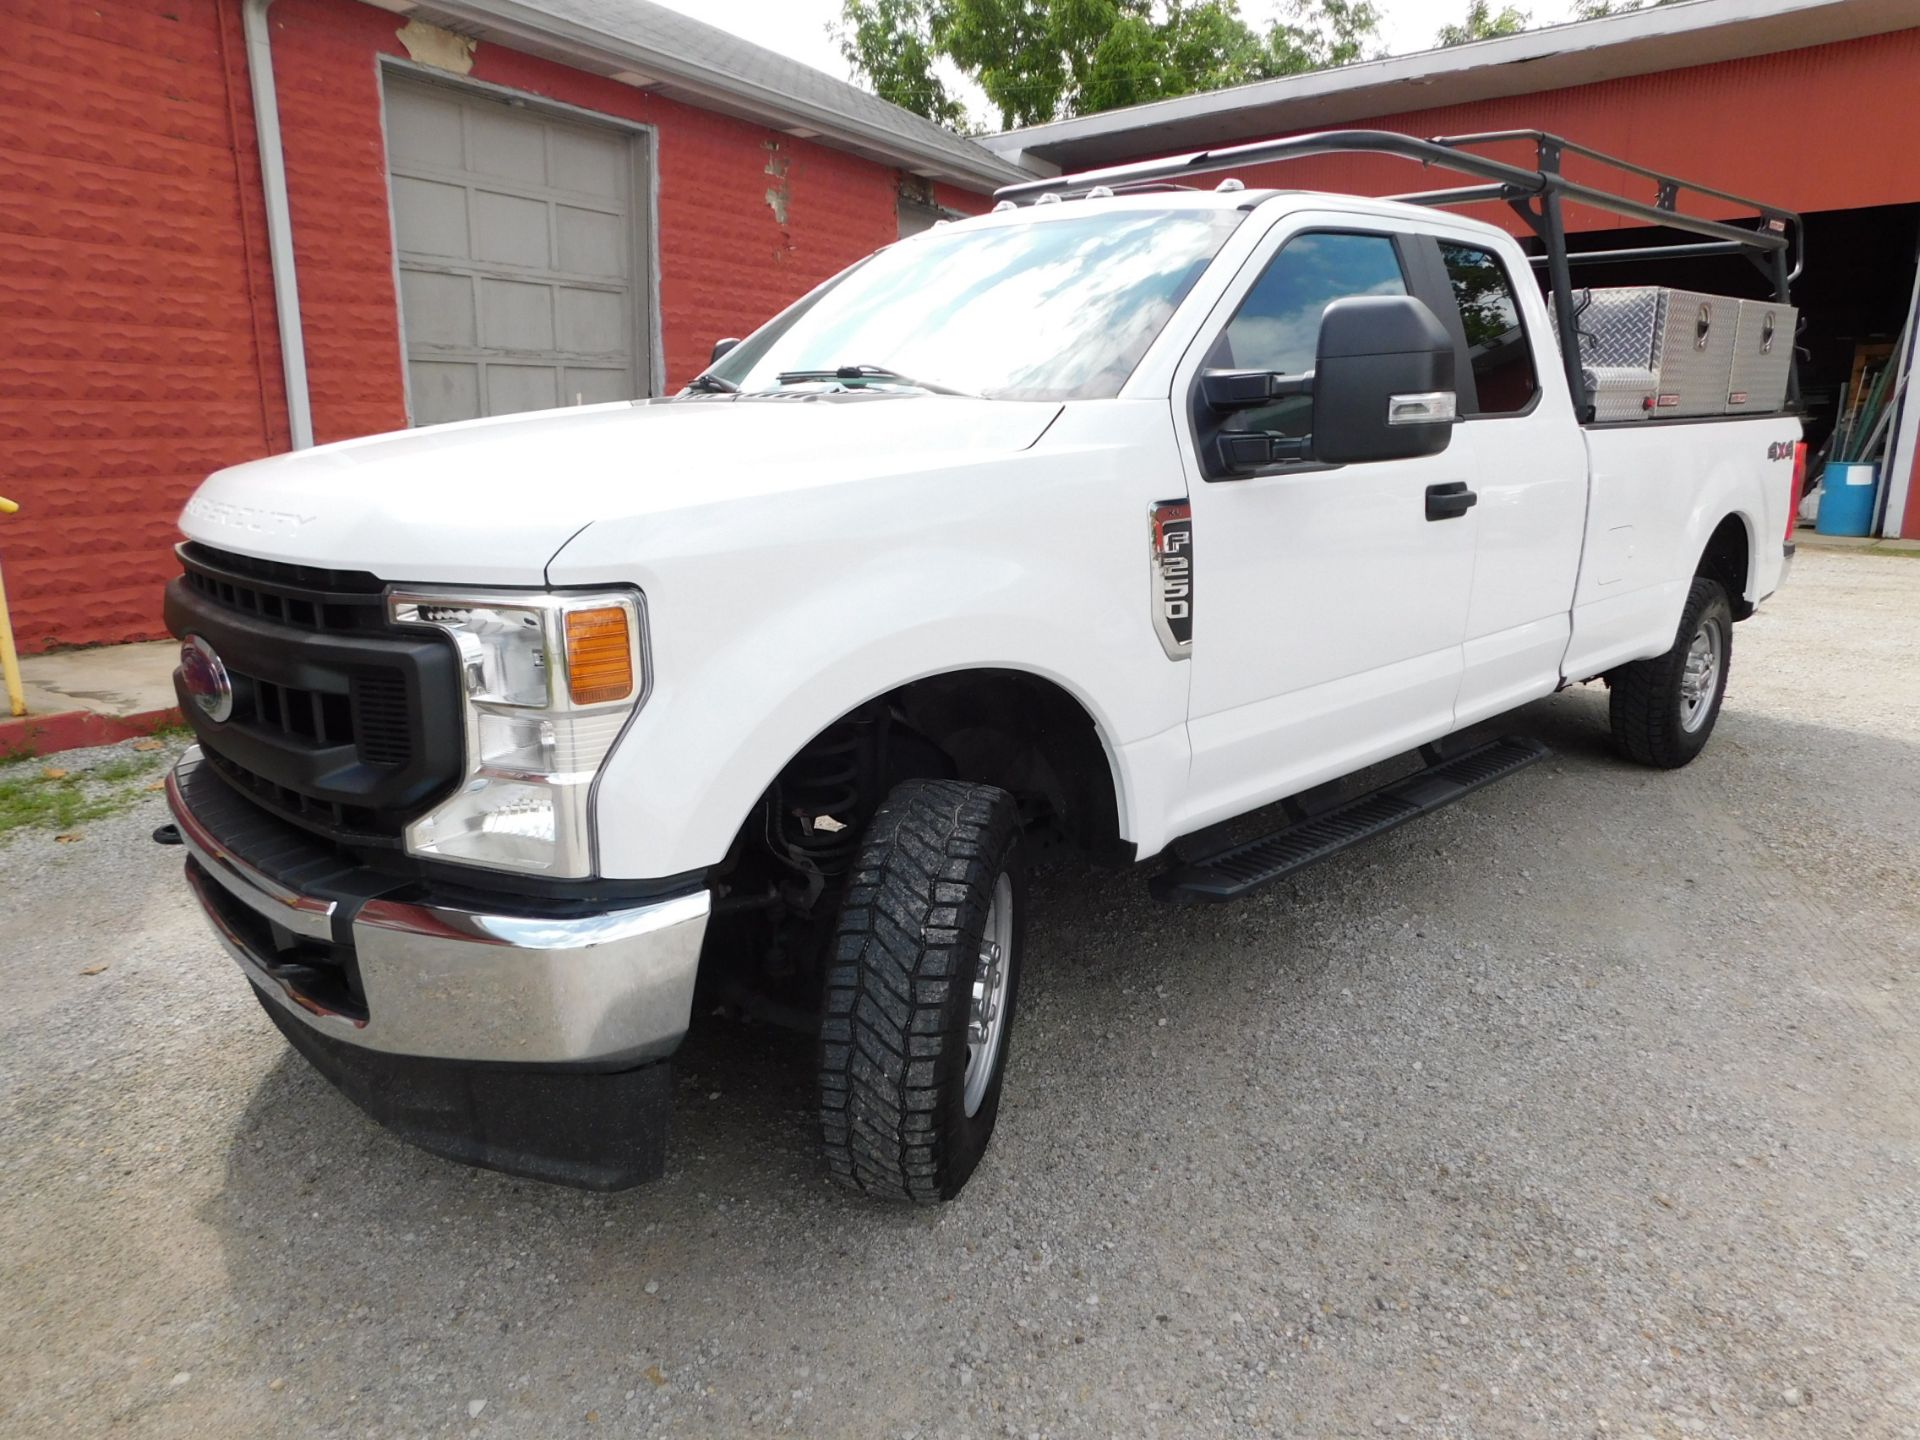 2020 Ford F-250 XL Etended Cab Pick-up Truck, Gas Engine, 4x4, PW, PL, AC, Trailer Brake Control, - Image 3 of 31